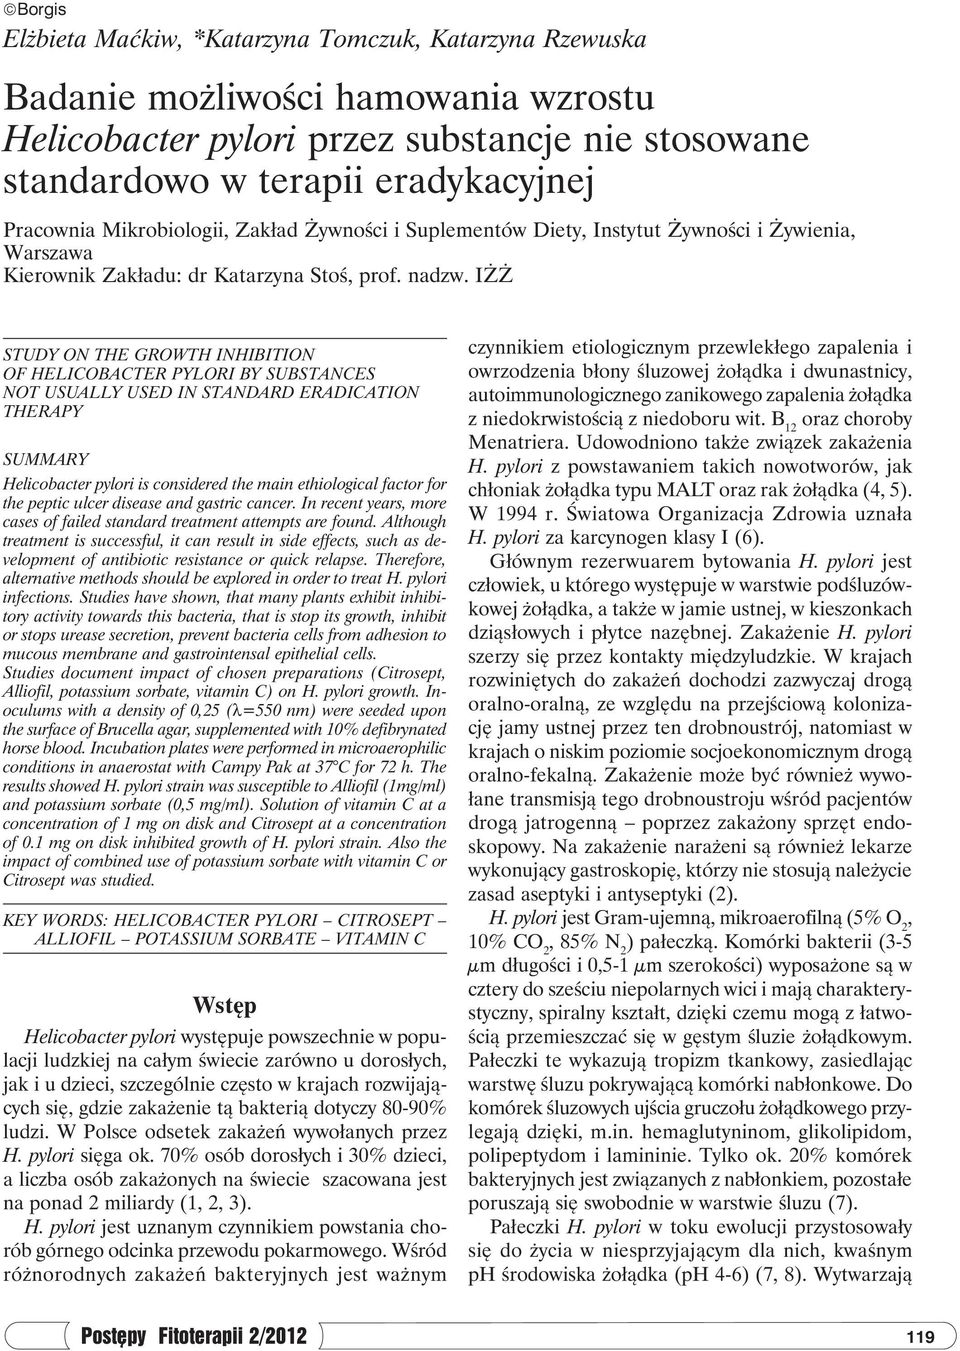 IŻŻ STUDY ON THE GROWTH INHIBITION OF HELICOBACTER PYLORI BY SUBSTANCES NOT USUALLY USED IN STANDARD ERADICATION THERAPY SUMMARY Helicobacter pylori is considered the main ethiological factor for the